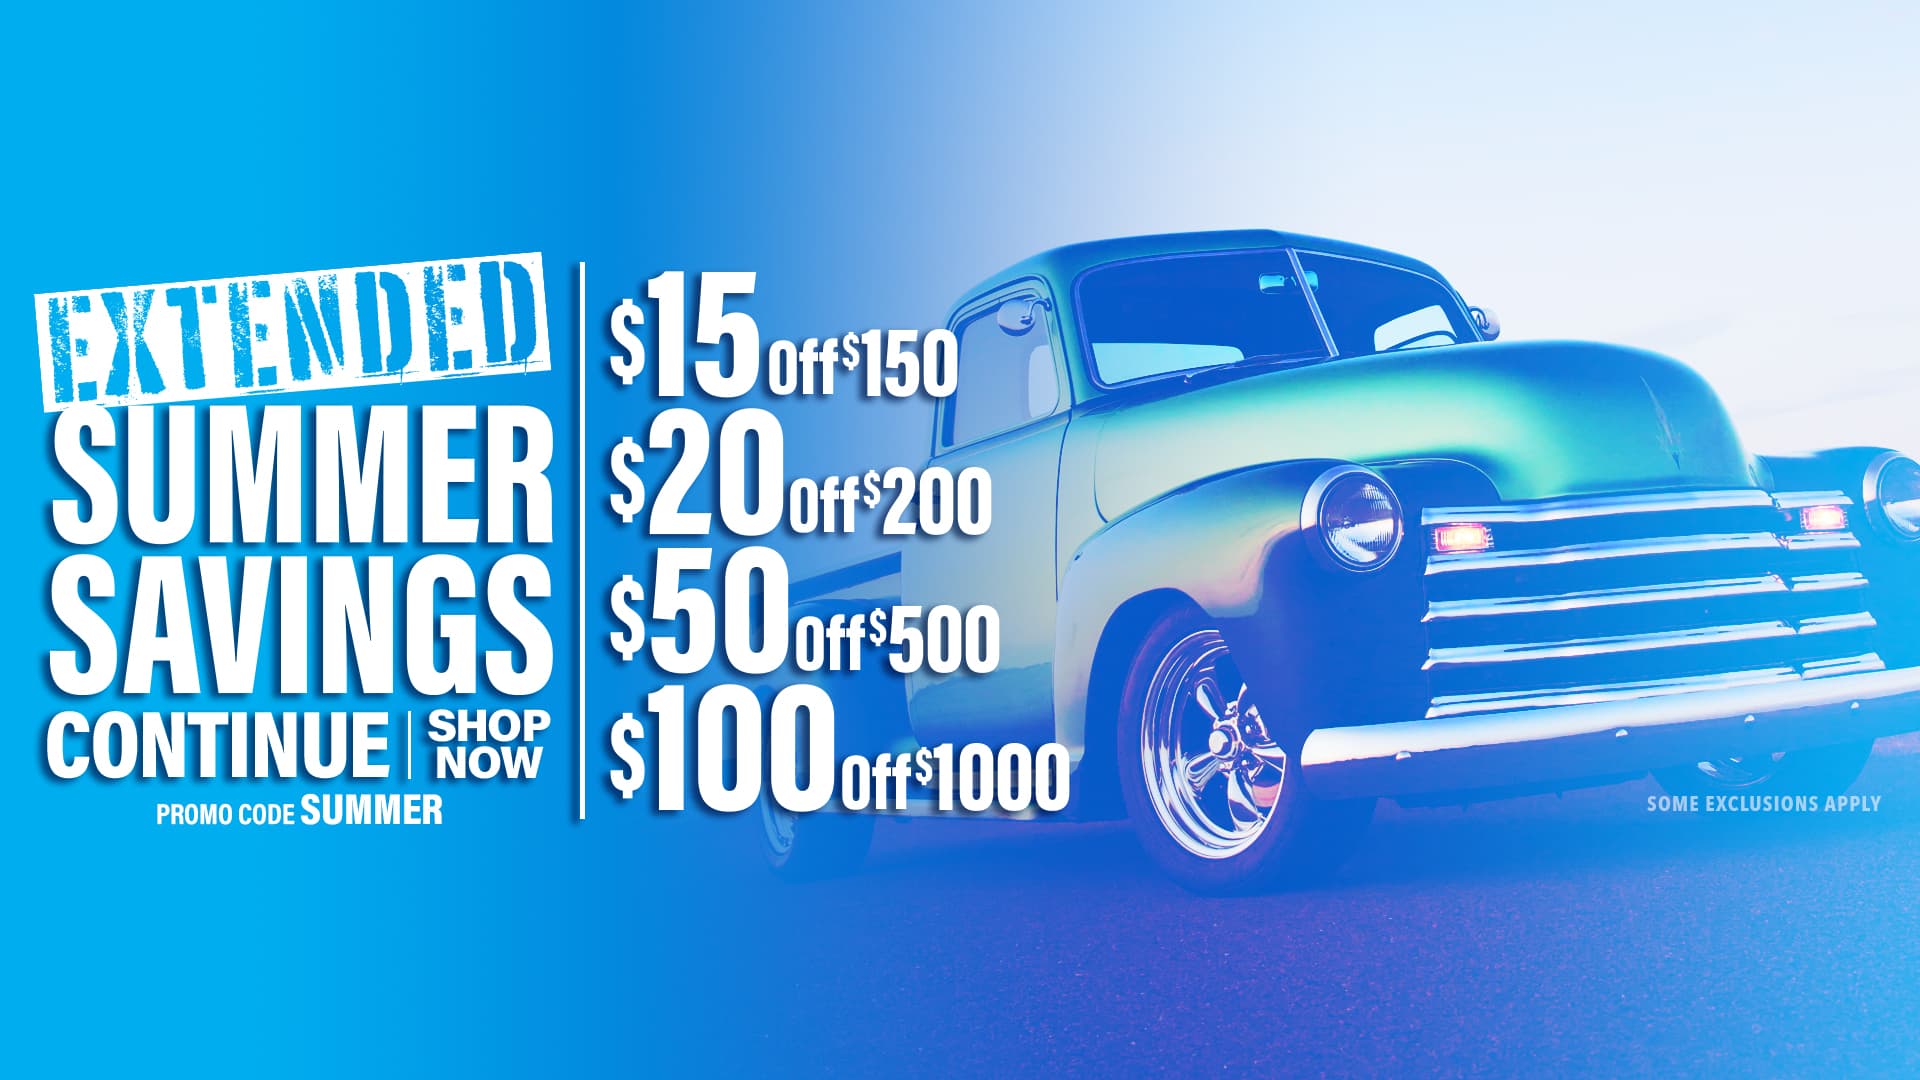 Extended Summer Savings - Save $15 Off $150, $20 Off $200, $50 Off $500, $100 Off $1000 Orders - Promo Code: SUMMER